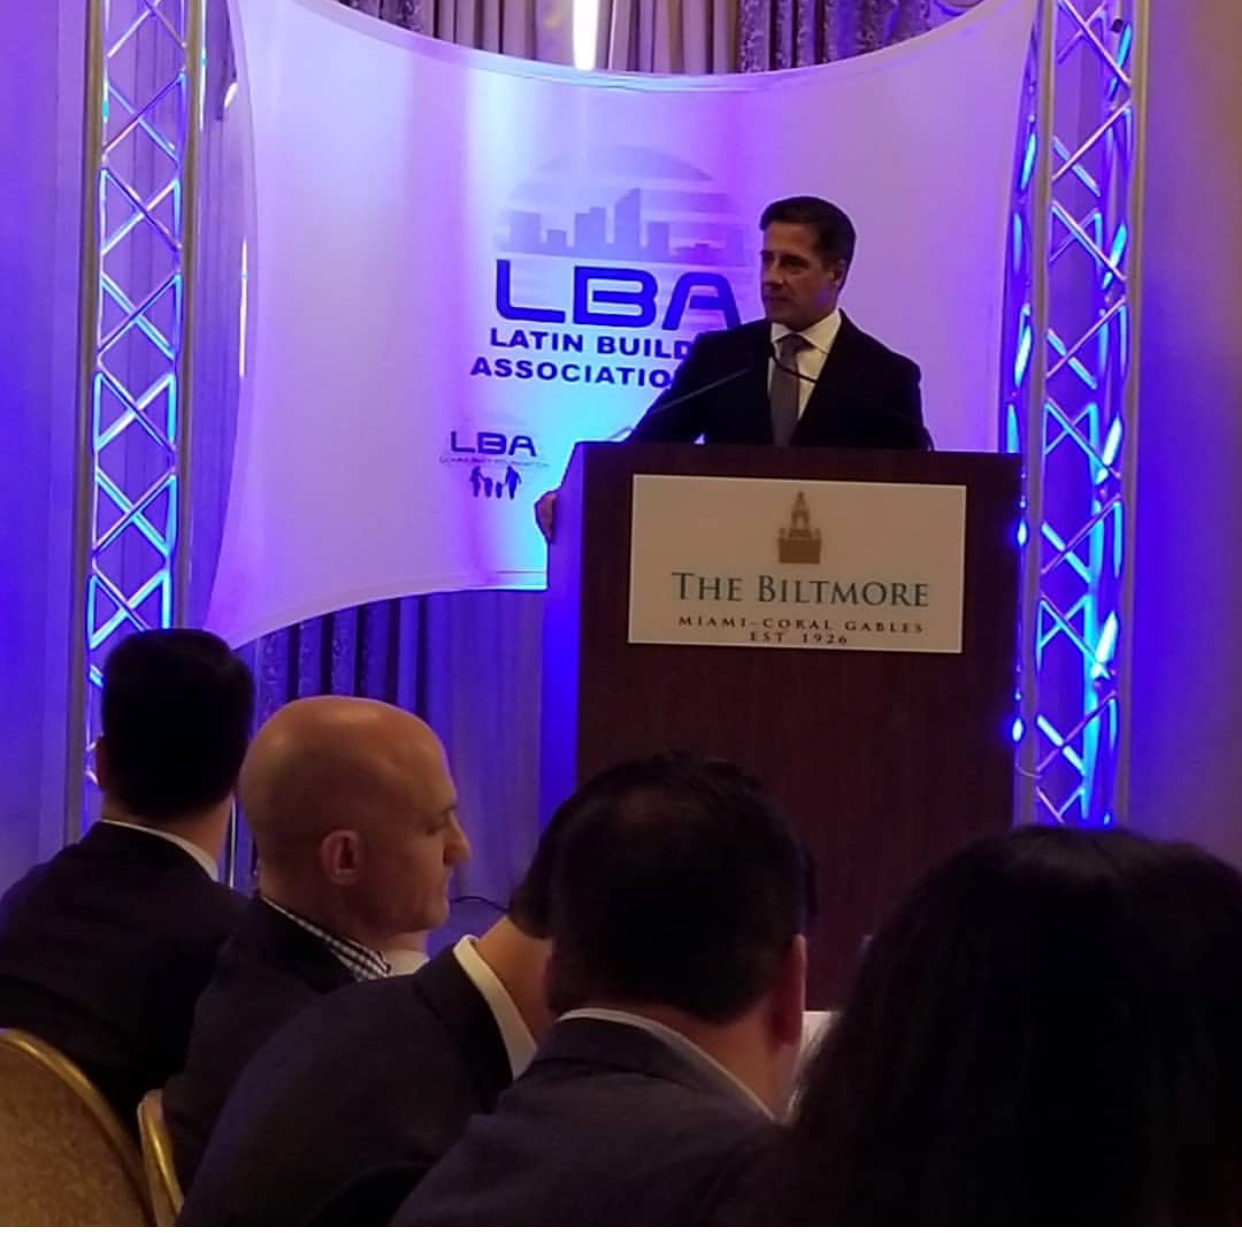 MDCPS Supt. Alberto Carvalho takes the stage at April luncheon